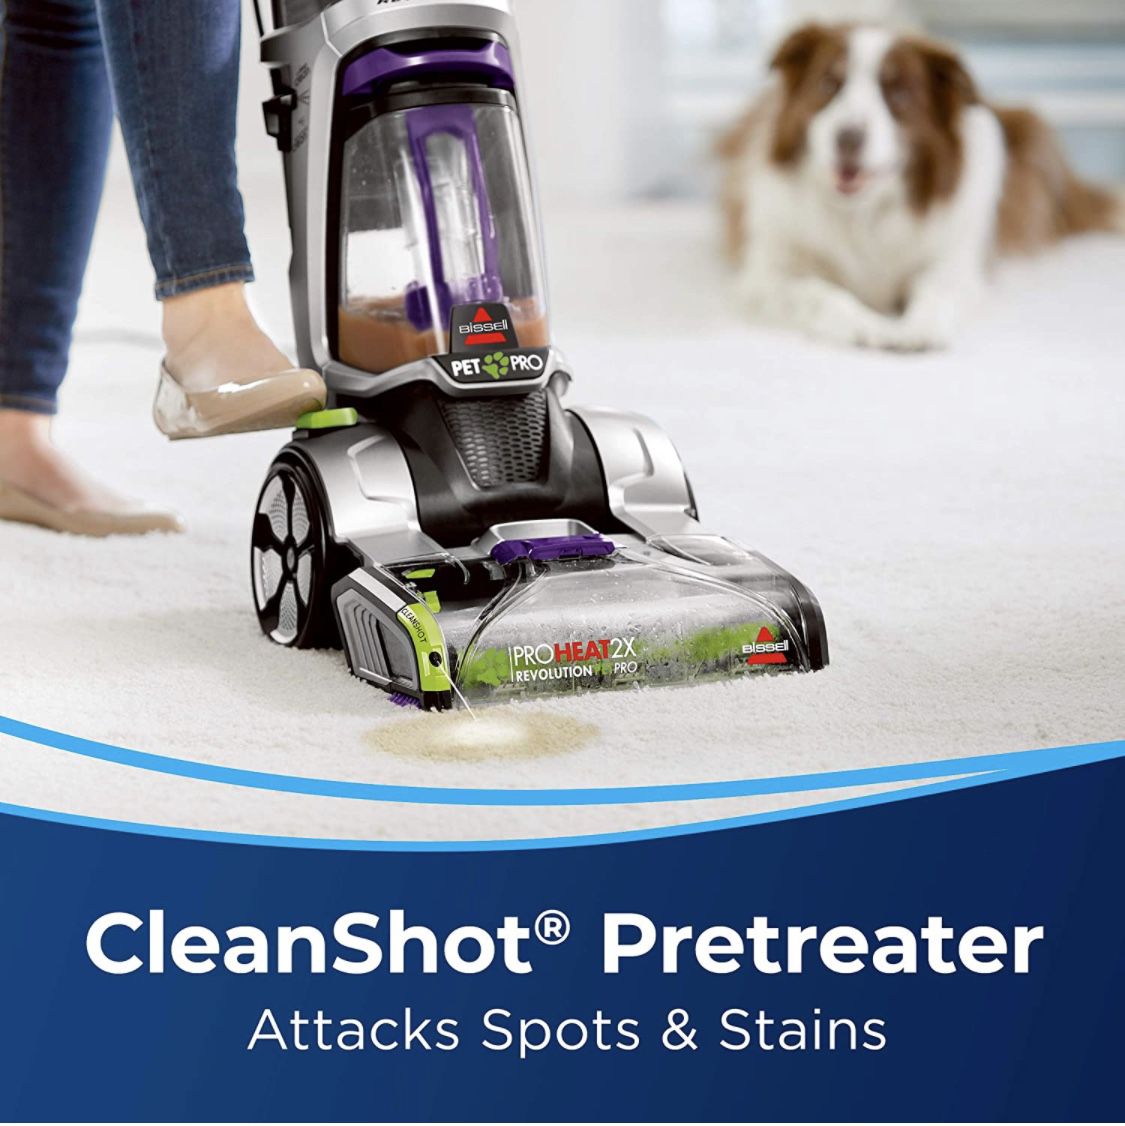 Bissell ProHeat 2X Revolution Pet Pro Full-Size Carpet Cleaner,